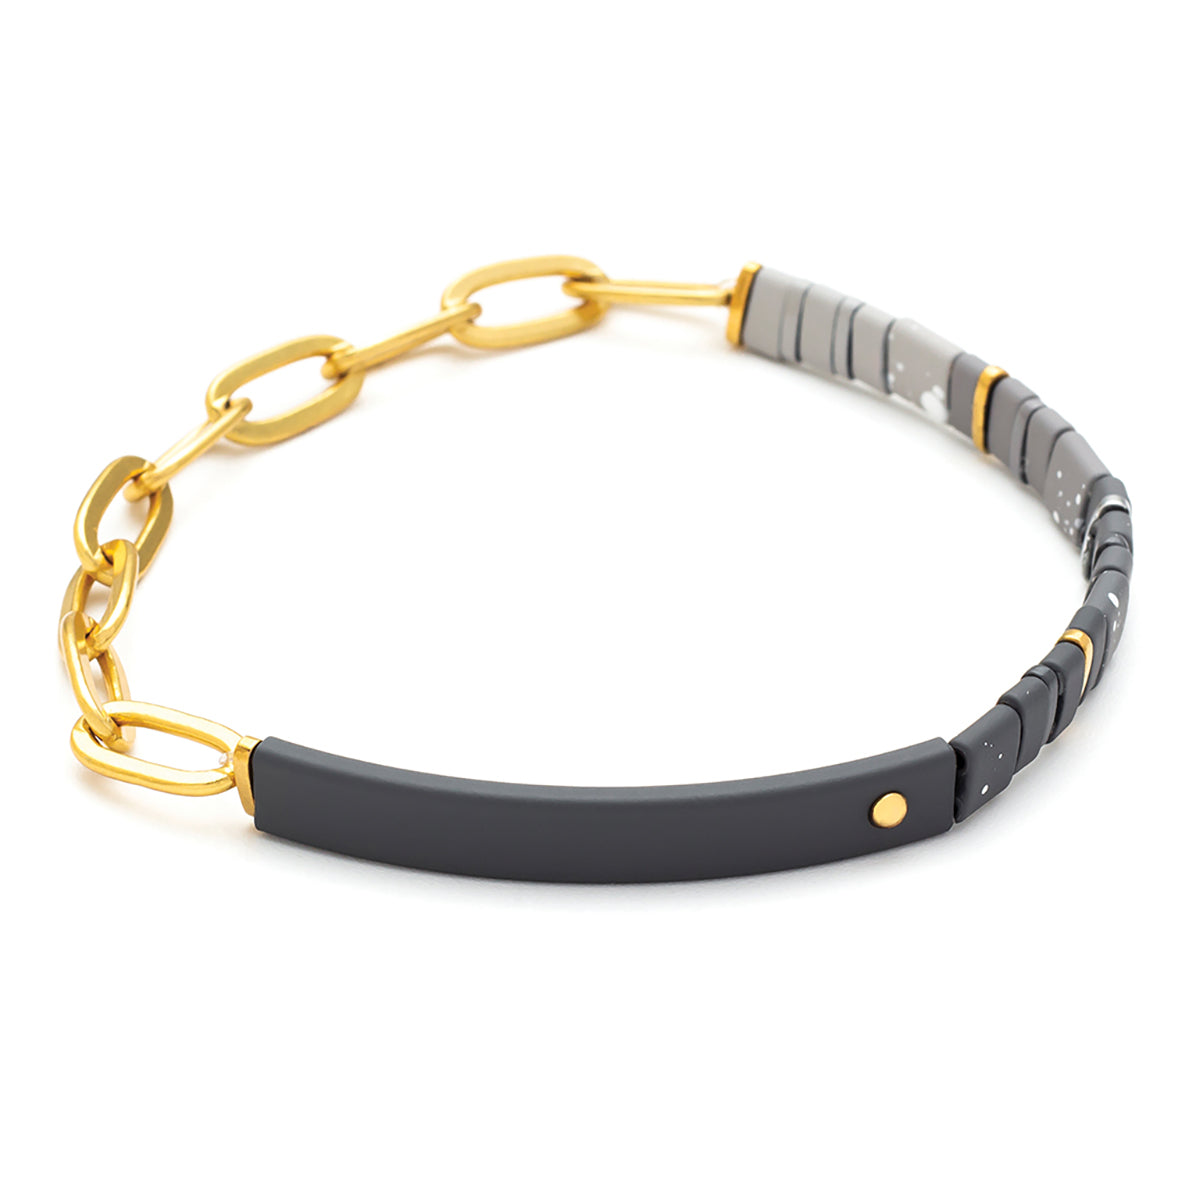 Scout Curated Wears Scout Curated Wears Good Karma Ombre with Chain Bracelet Strength &amp; Grace Charcoal &amp; Gold